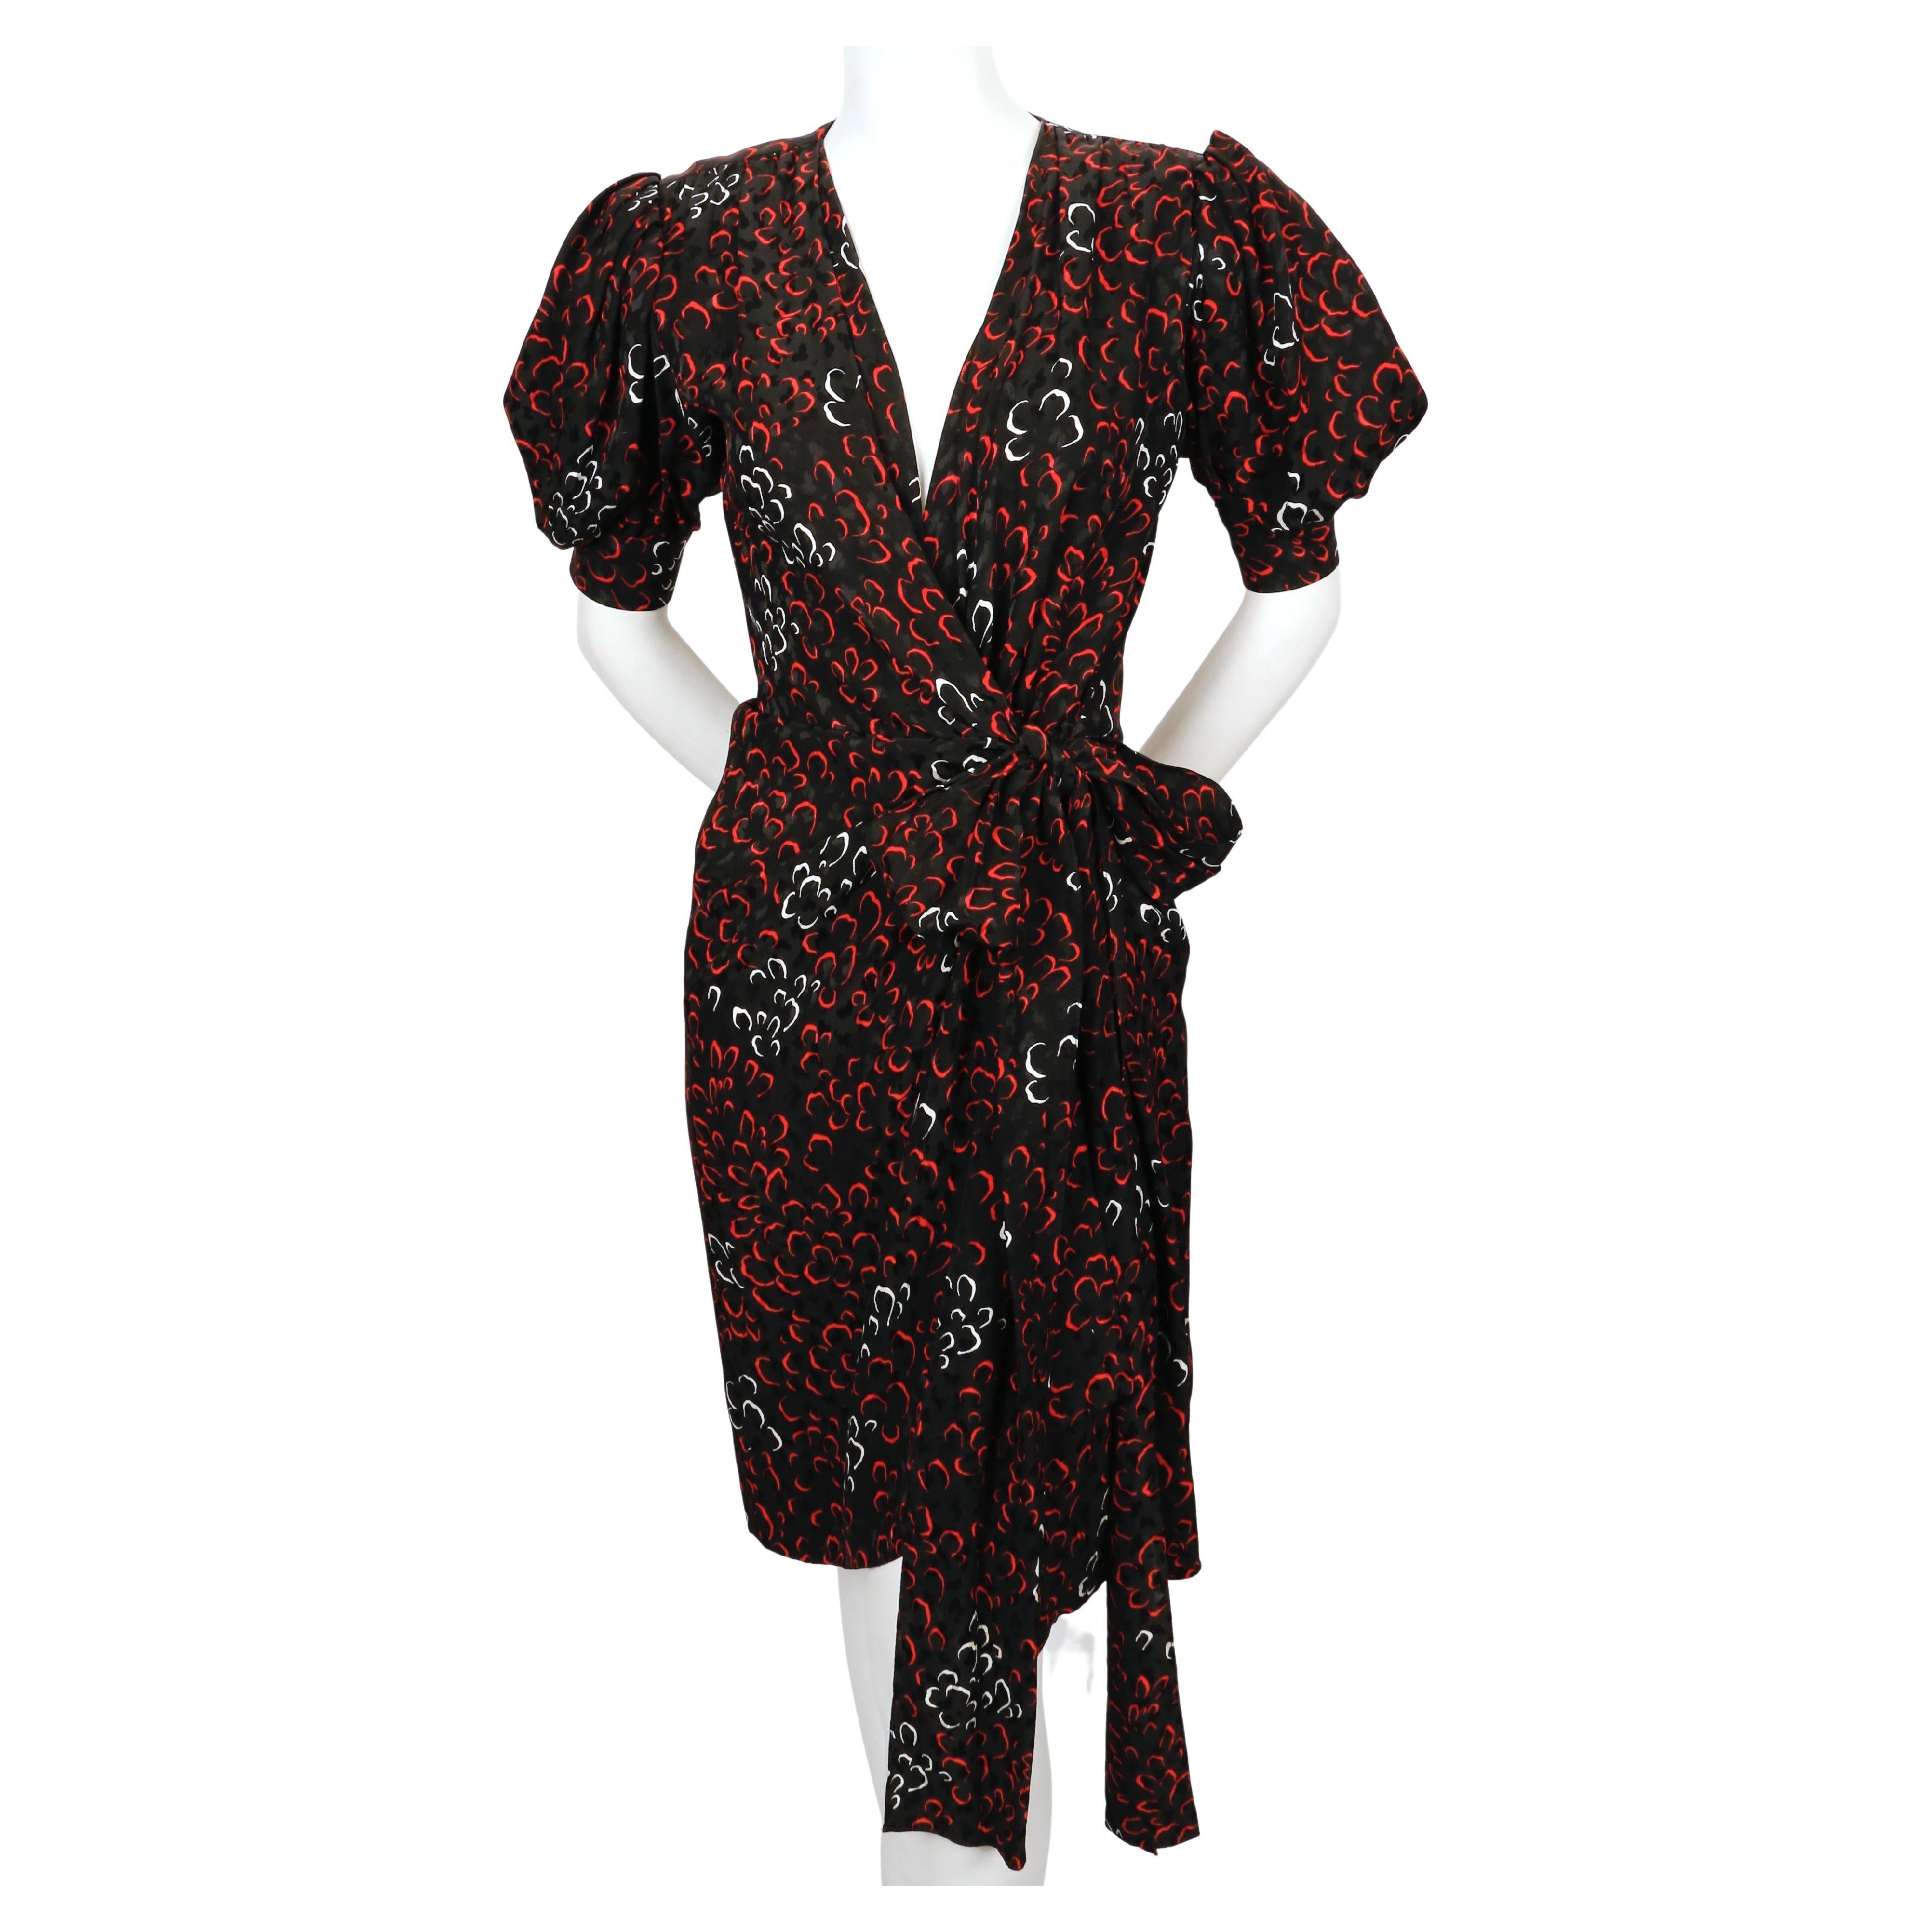 Abstract-printed, silk wrap dress from Yves Saint Laurent dating to the early 1980's. Colors are jet black, red and white. Labeled a French size 34. Approximate measurements: shoulder 14.25